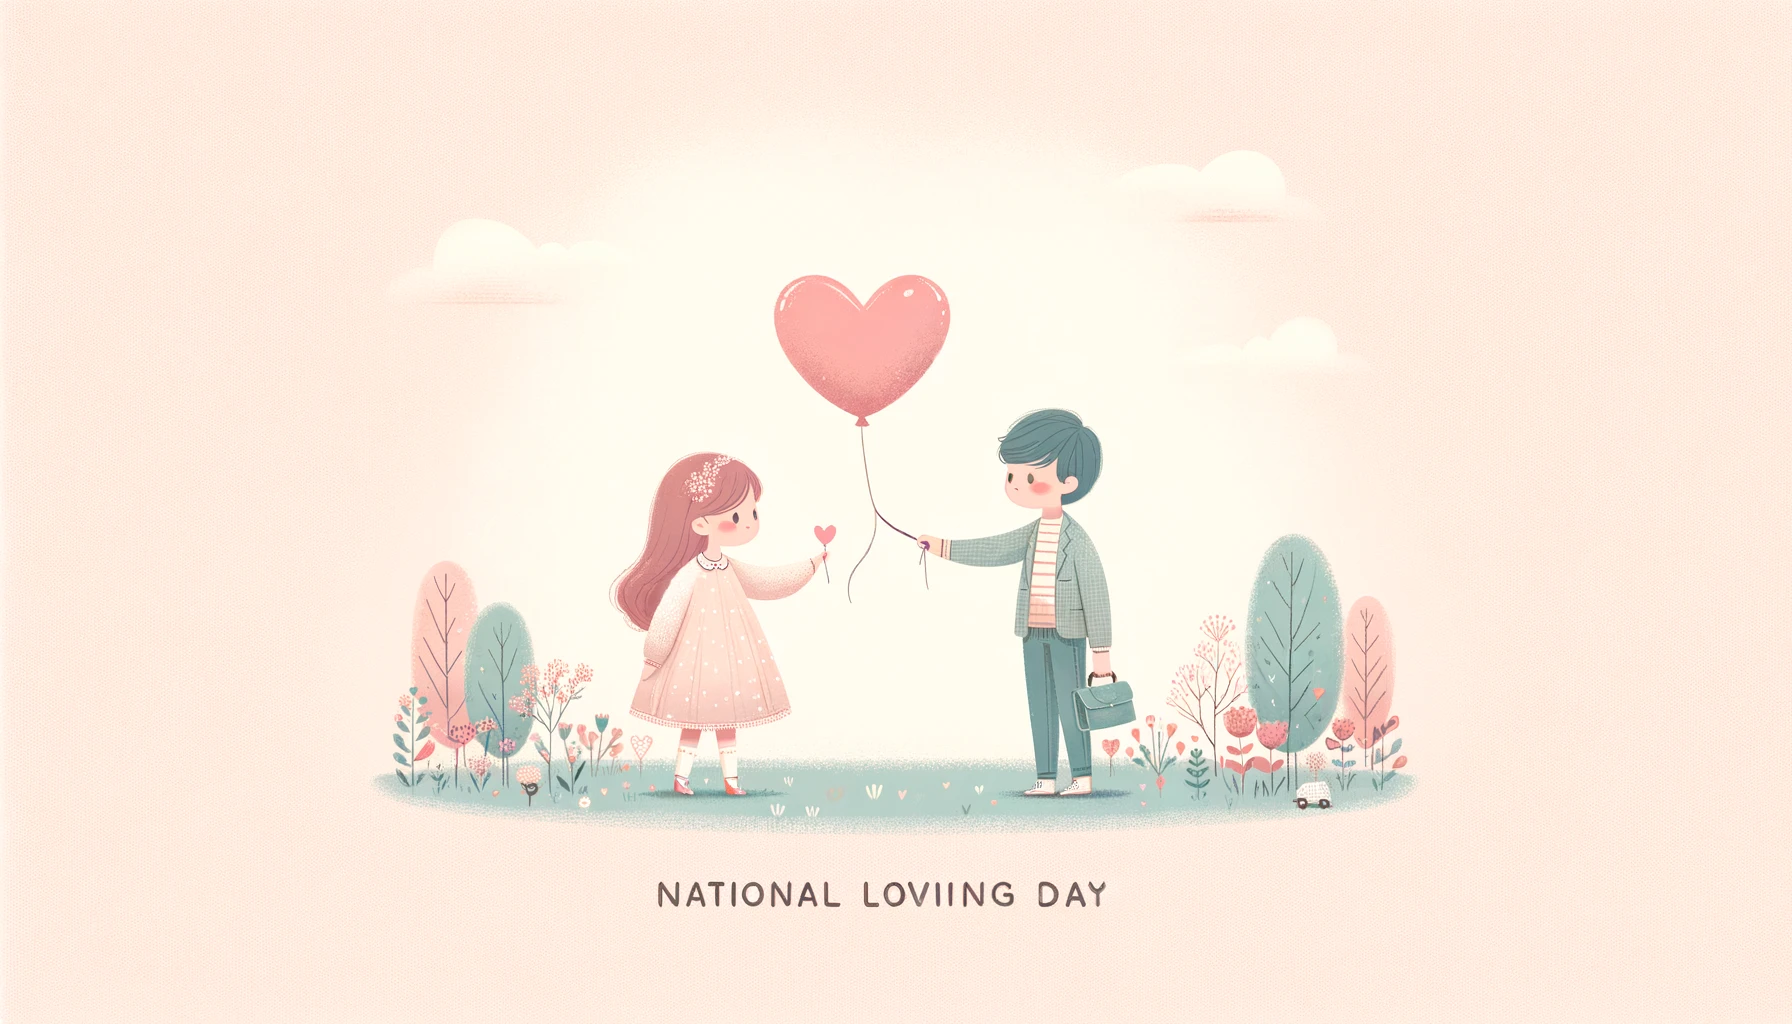 Promote Inclusivity on National Loving Day